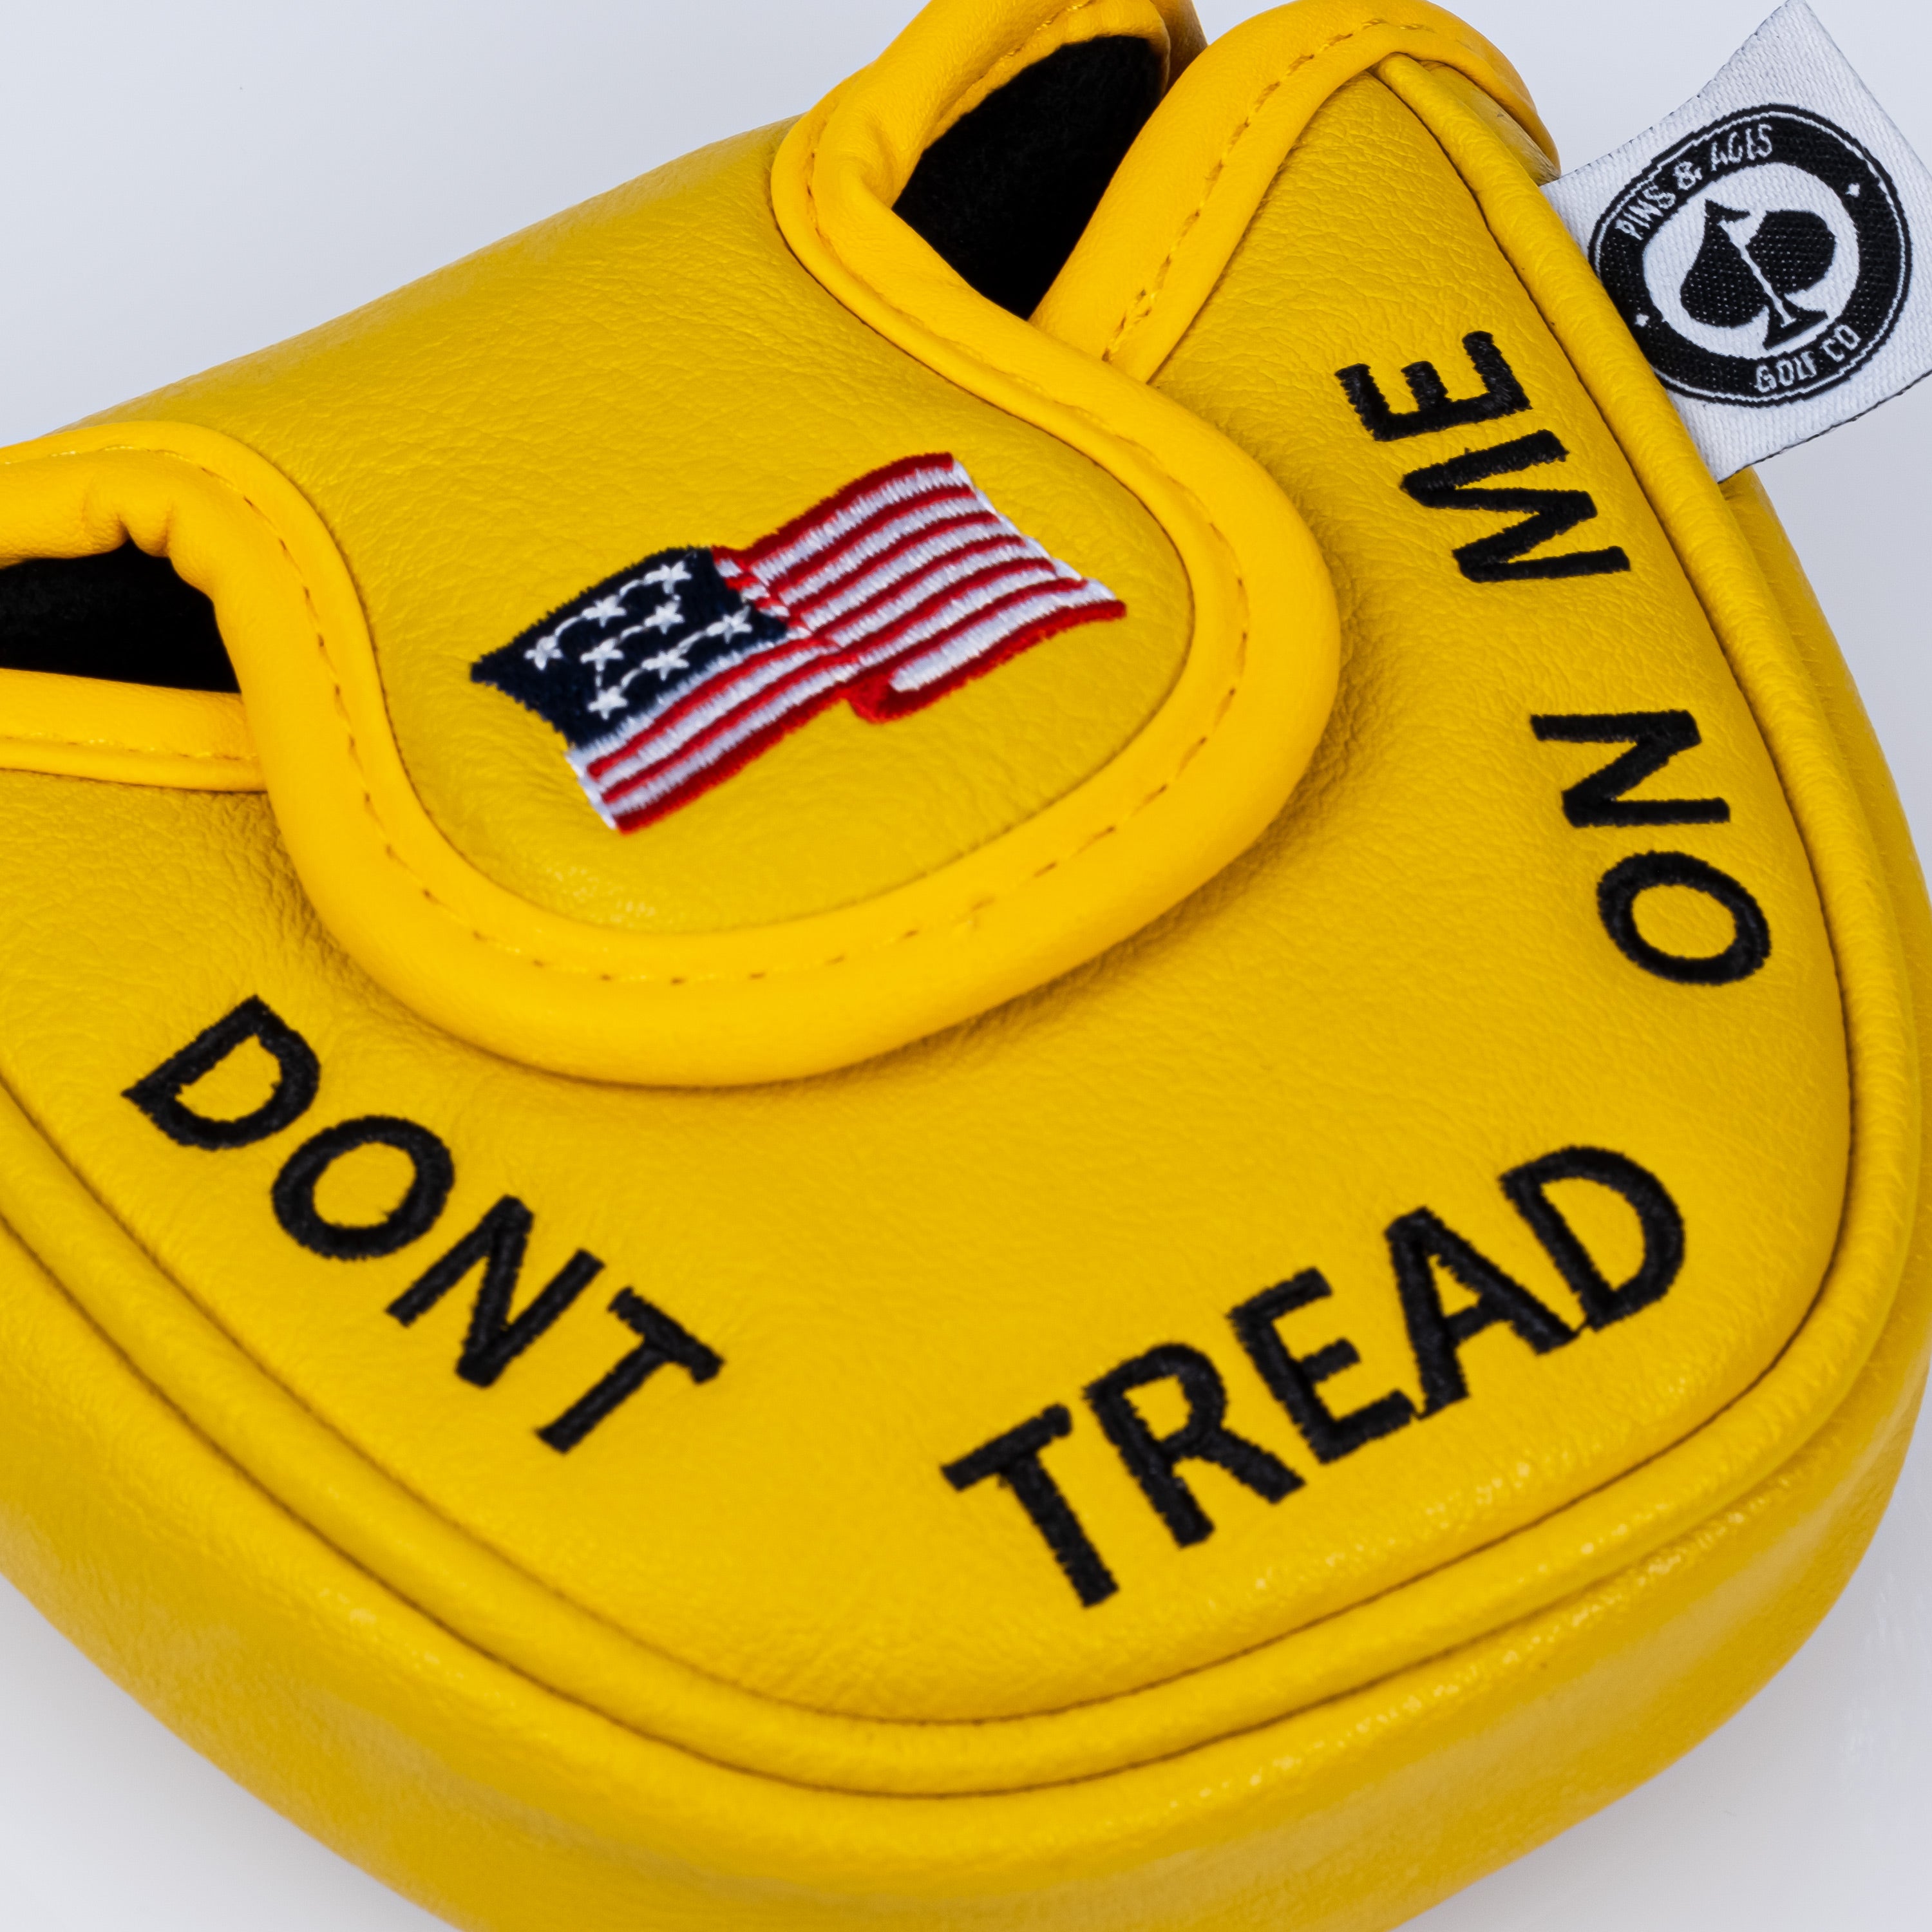 Don't Tread on Me - Mallet Putter Cover